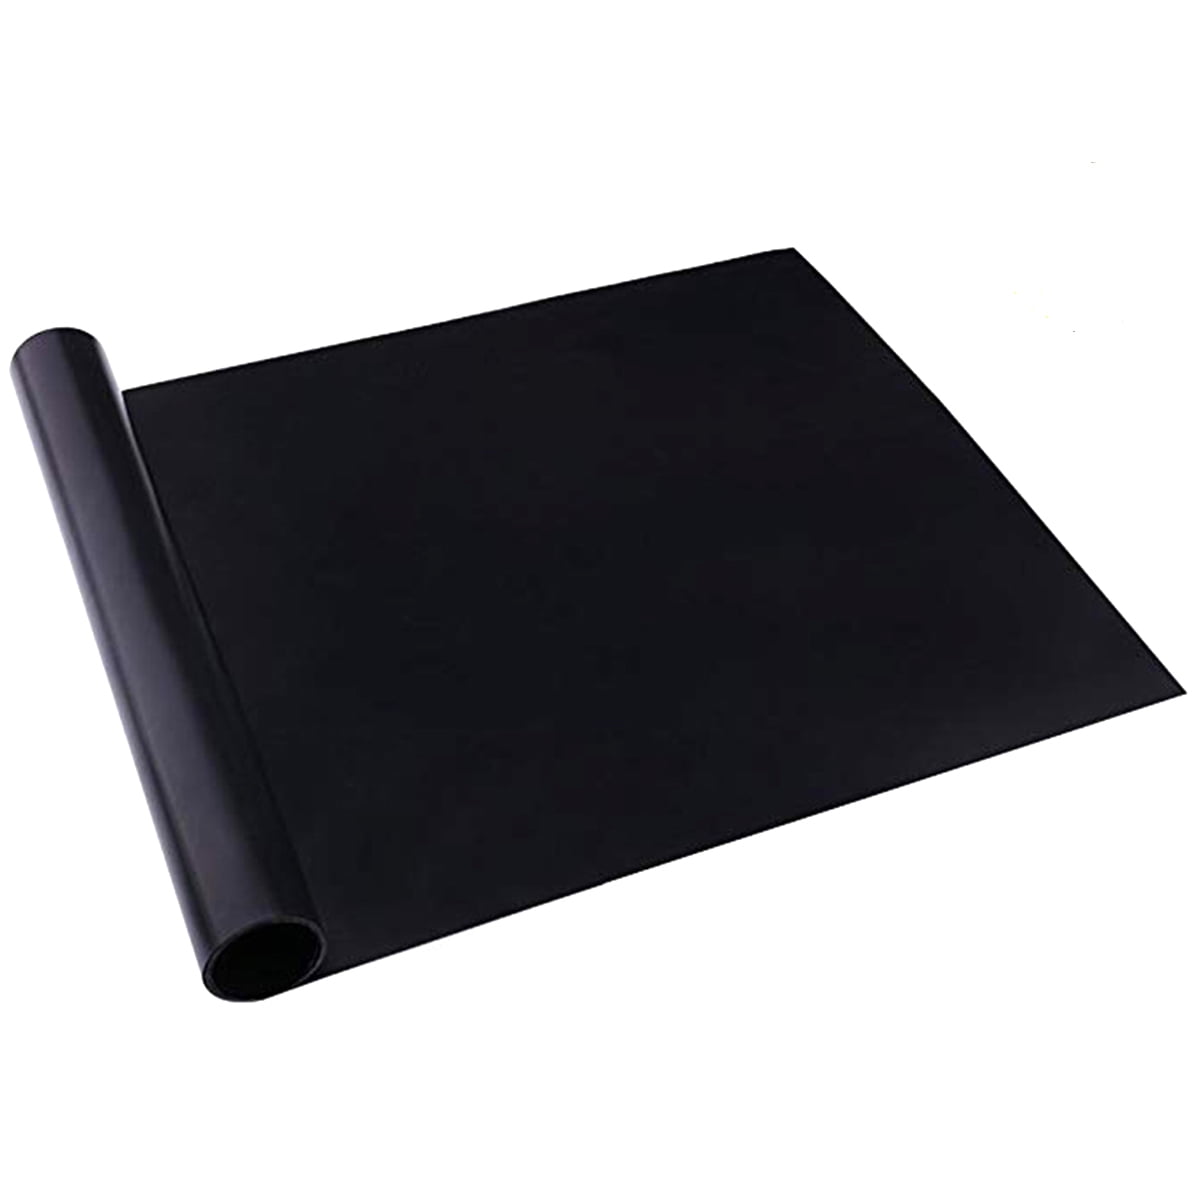 1PC Reusable Non-stick Black BBQ Grill Mat Barbecue Baking Liner Cooking Sheet 